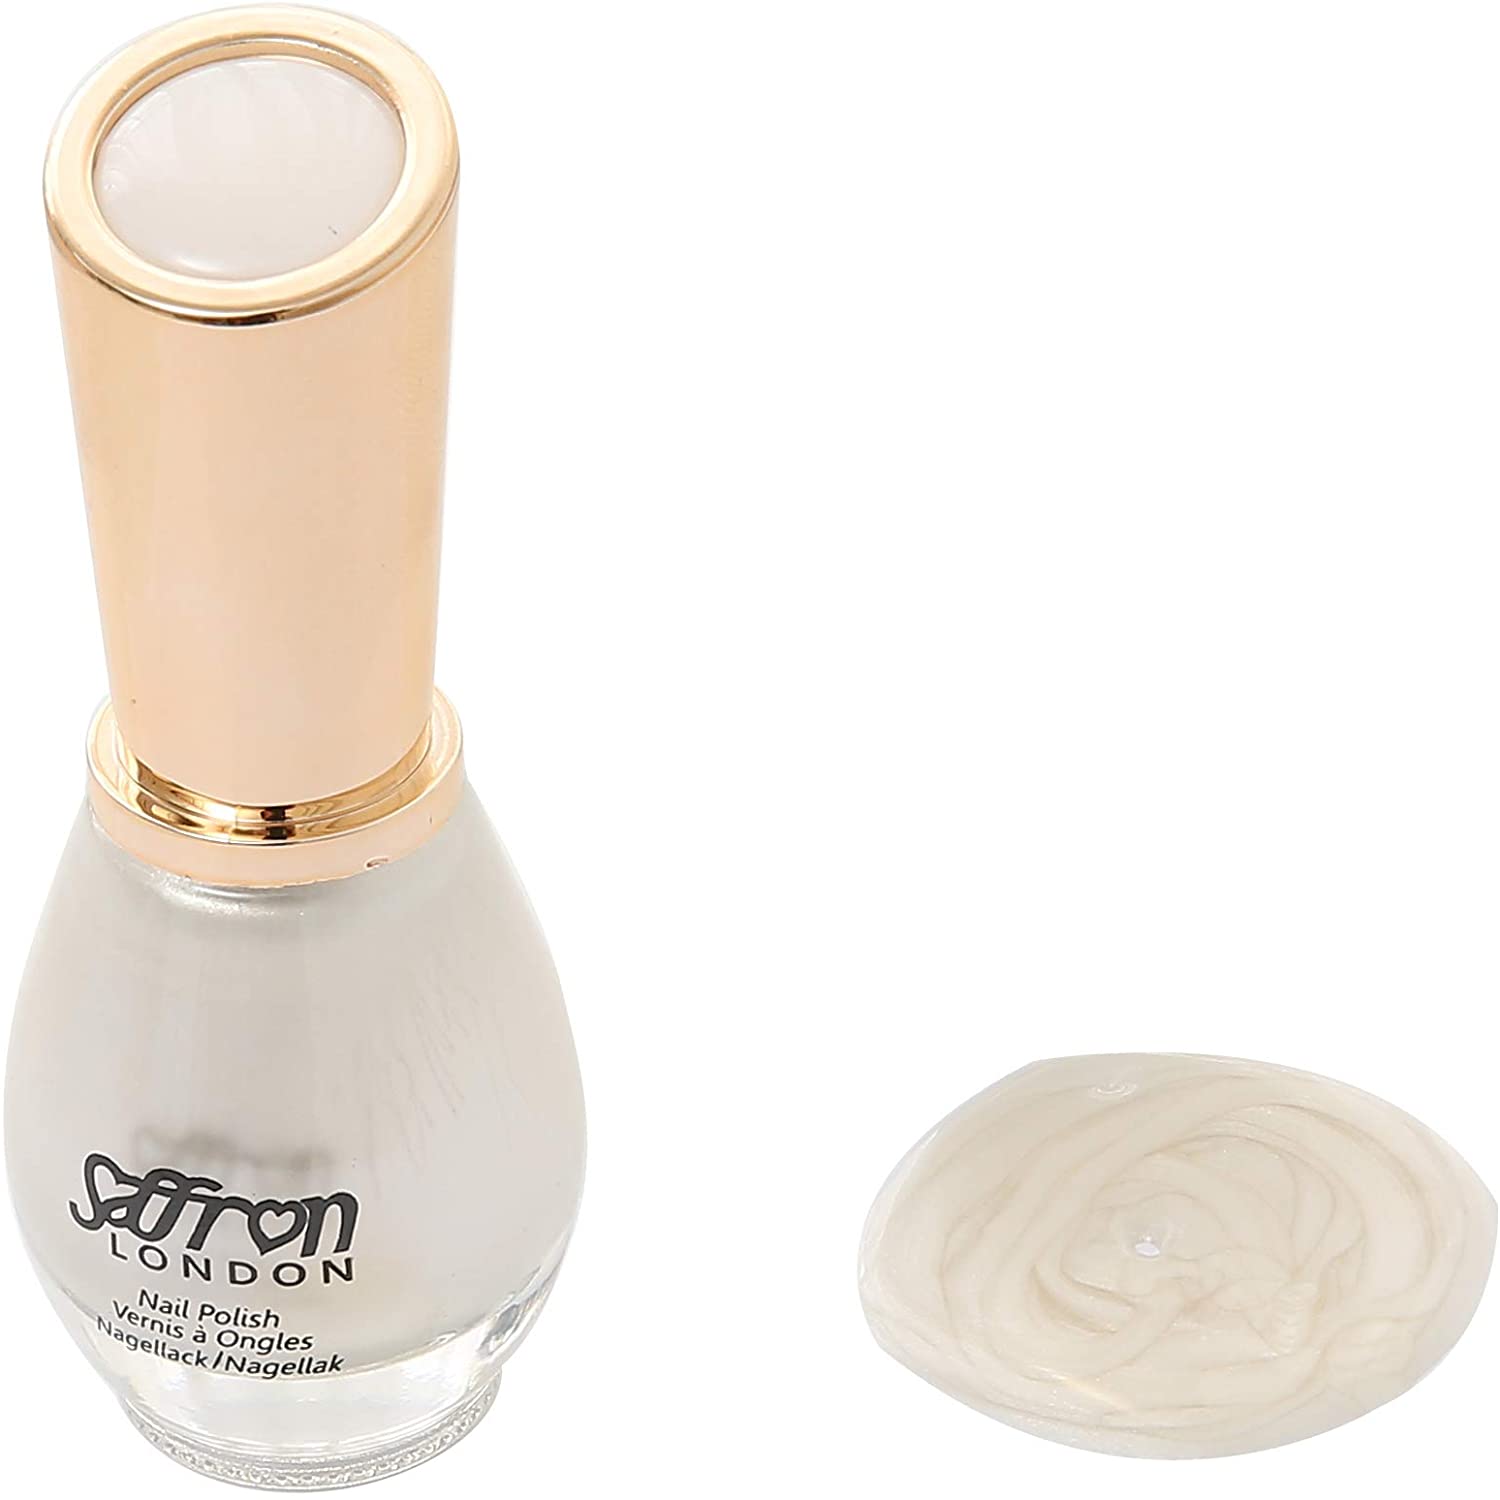 2st Saffron Pearl Shades Polish - 27 Mother of Pearls